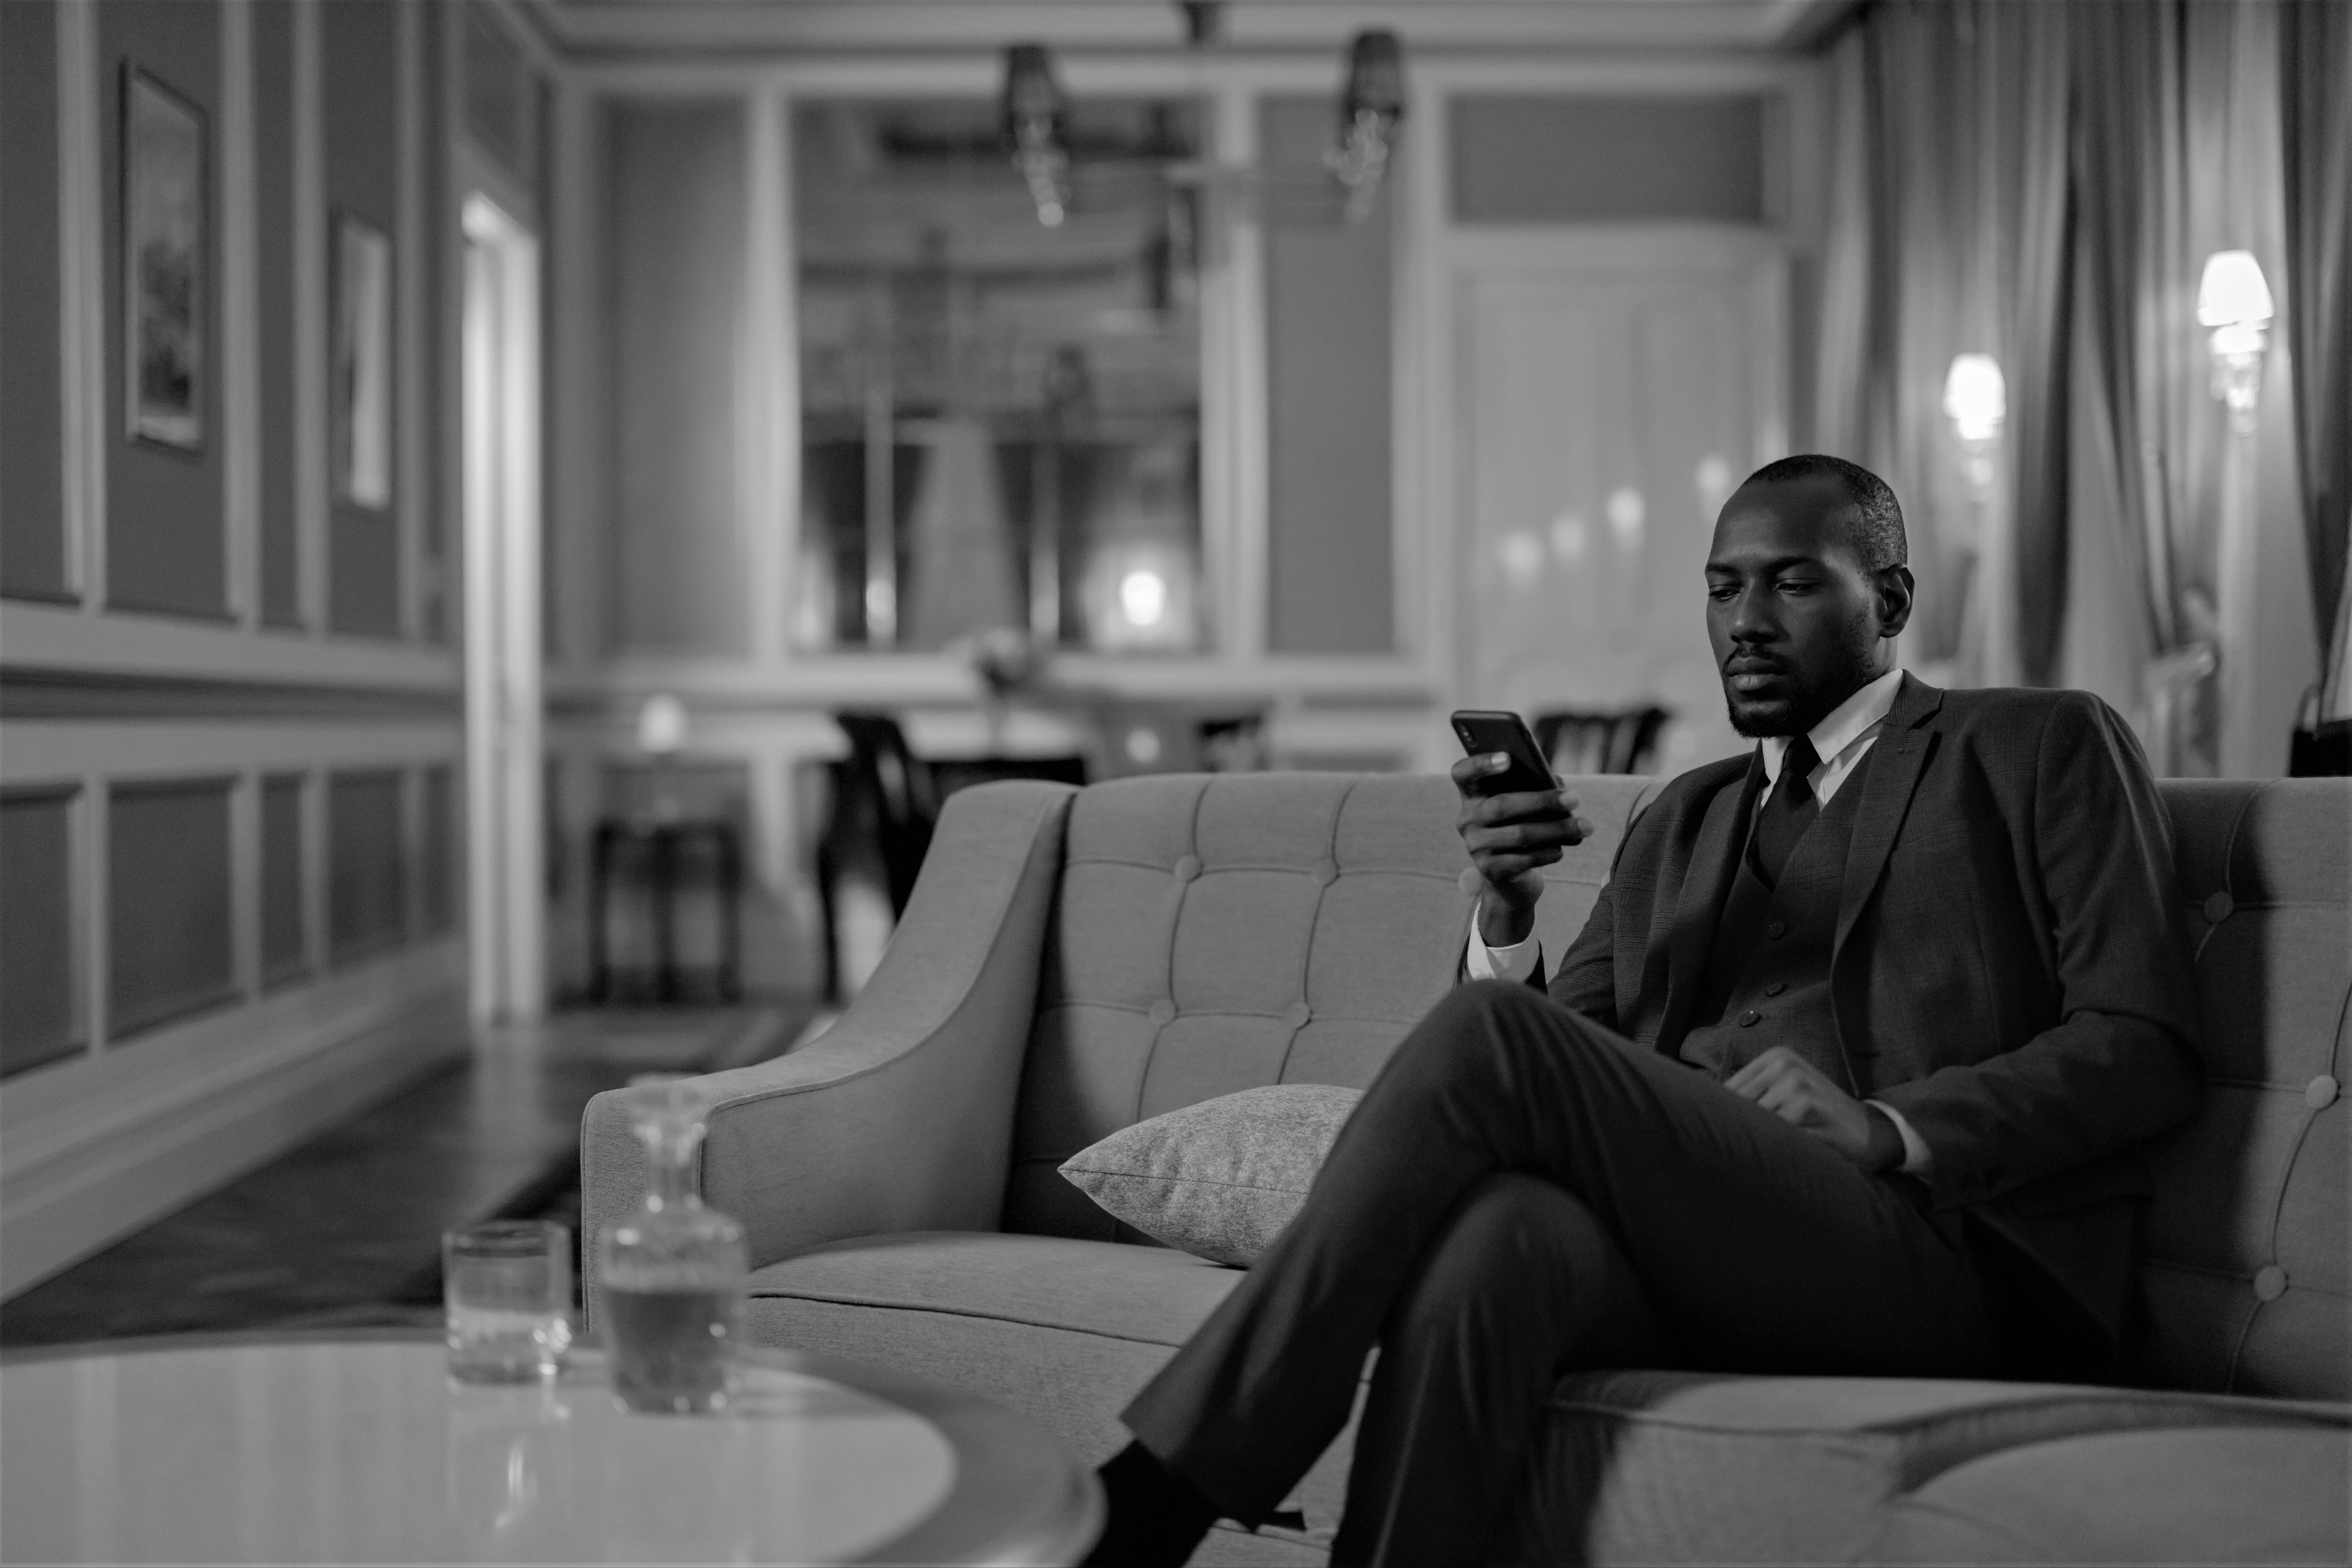 Black man in suits sitting down